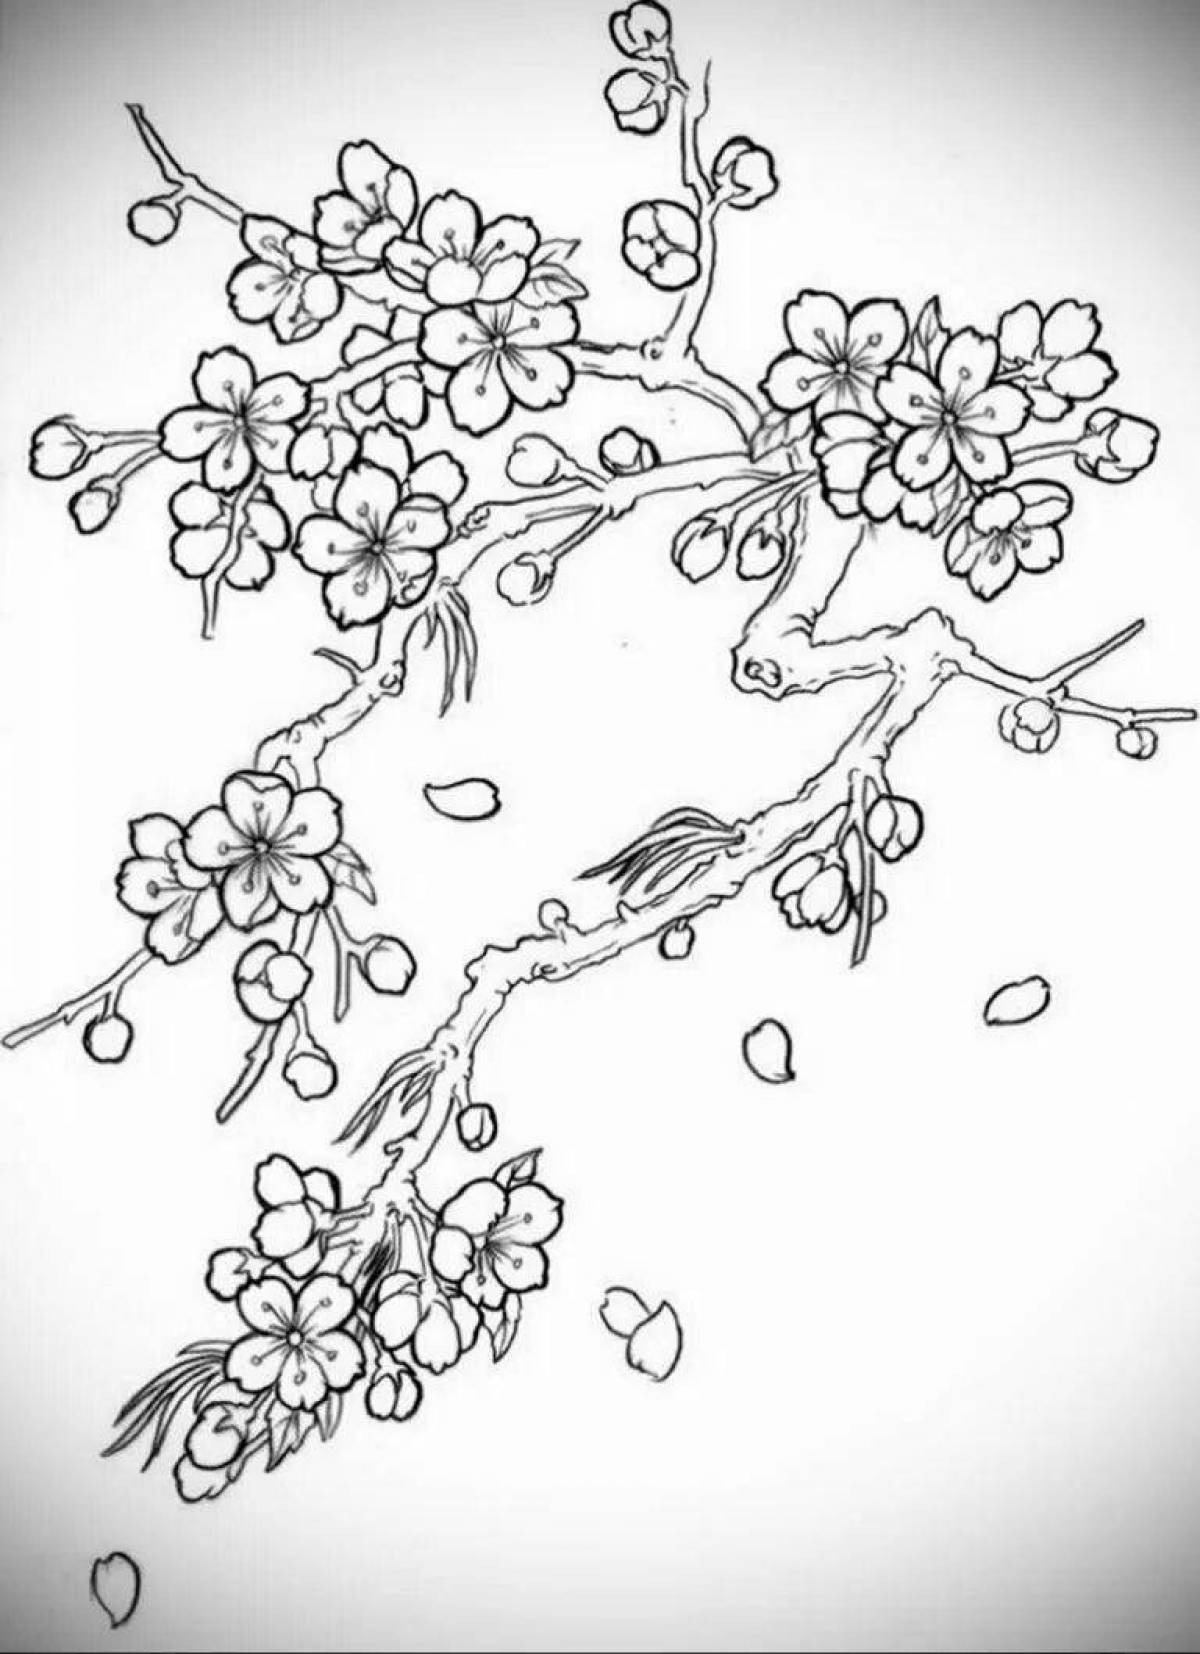 Coloring cherry blossom coloring page